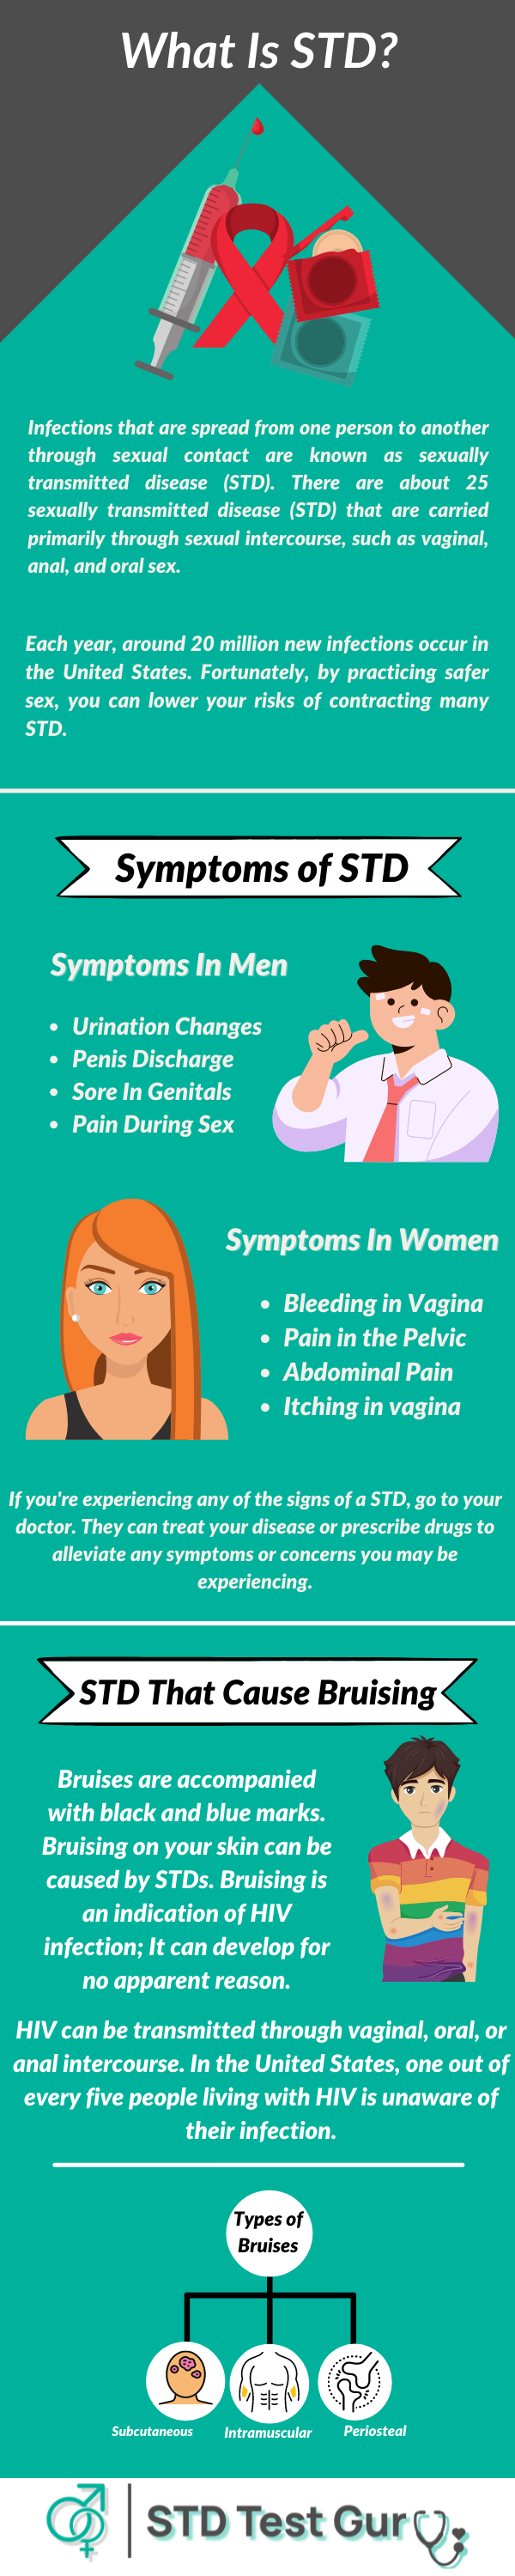 In this article, we brief about STD that cause bruising and other symptoms.